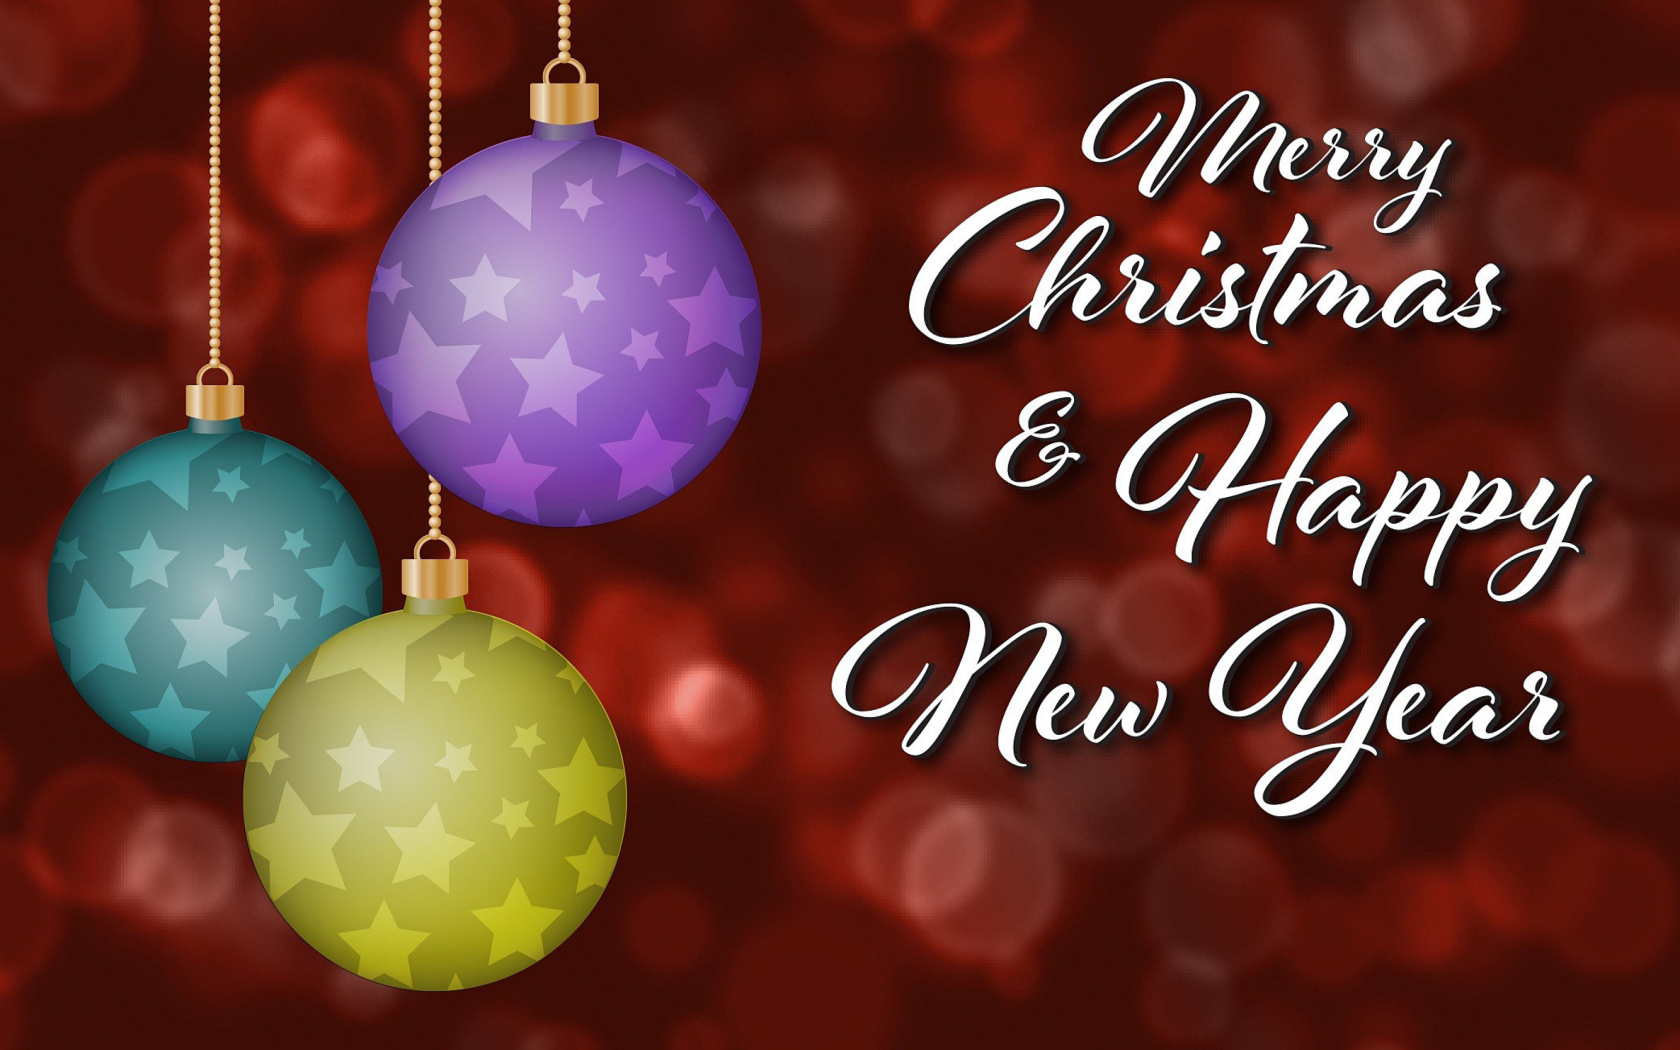 Merry Christmas and Best Wishes for a Happy New Year wallpaper 1680x1050